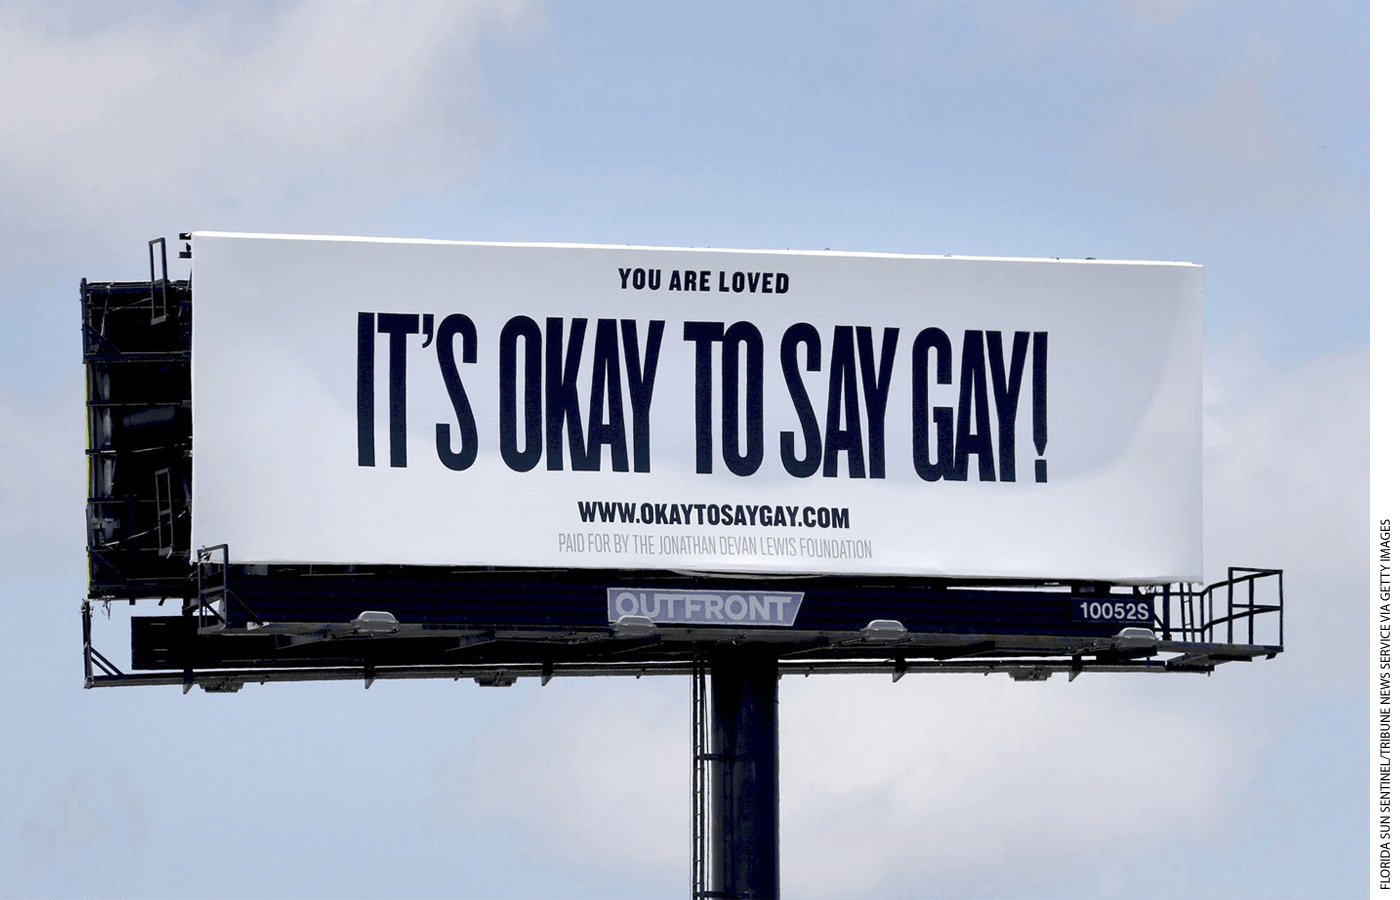 Highway billboards respond to DeSantis’s parental rights law, which restricts instruction on some sex and gender topics before 4th grade.